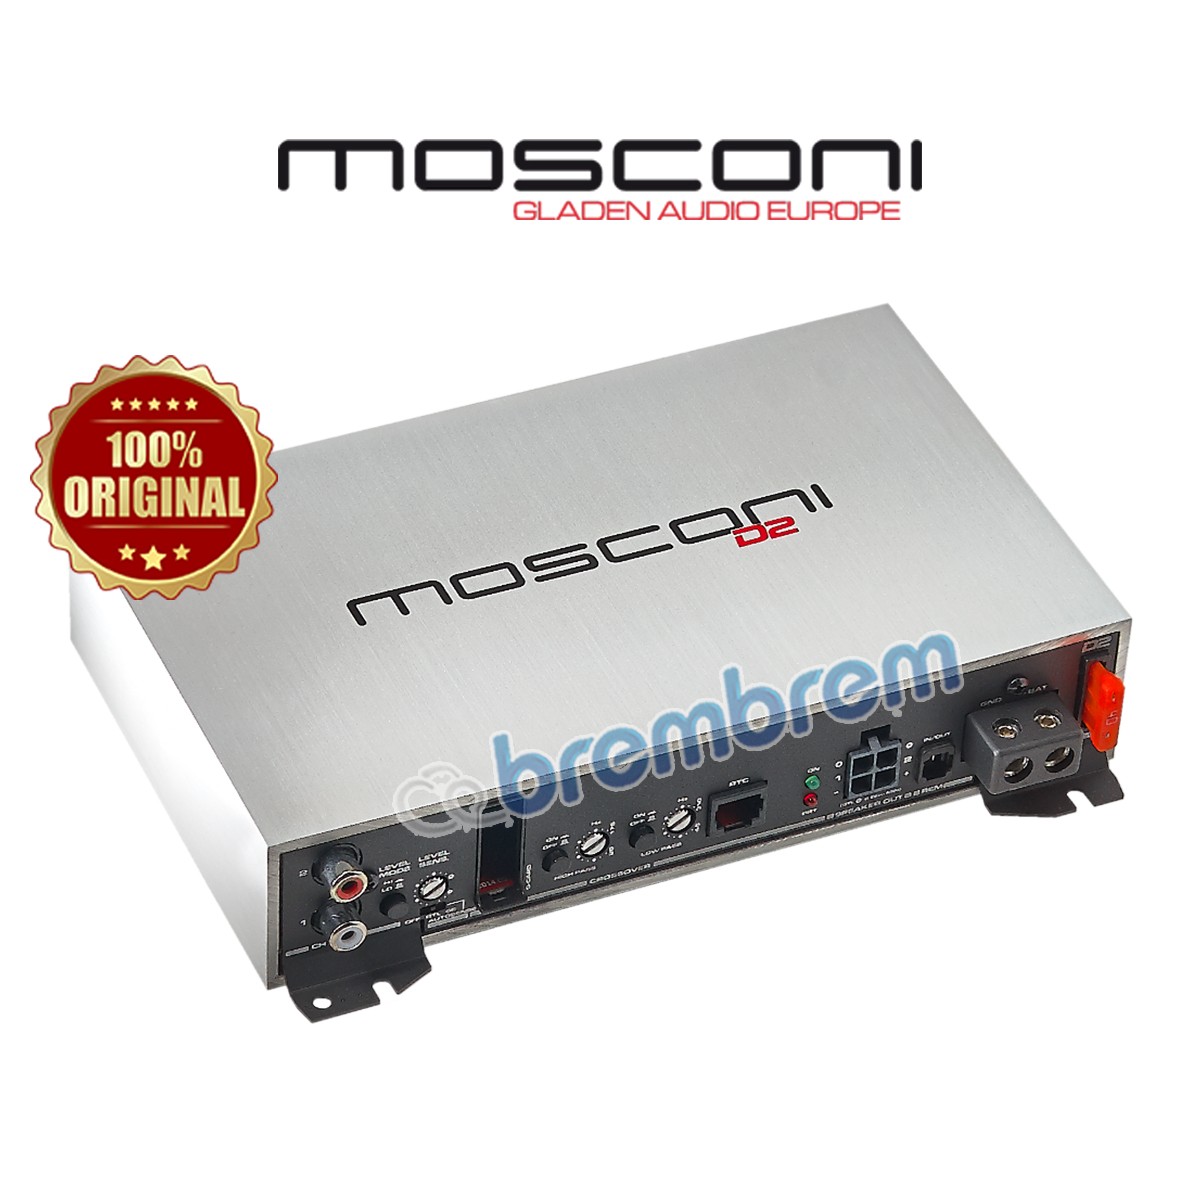 MOSCONI D2 150.2 - POWER 2 CHANNEL